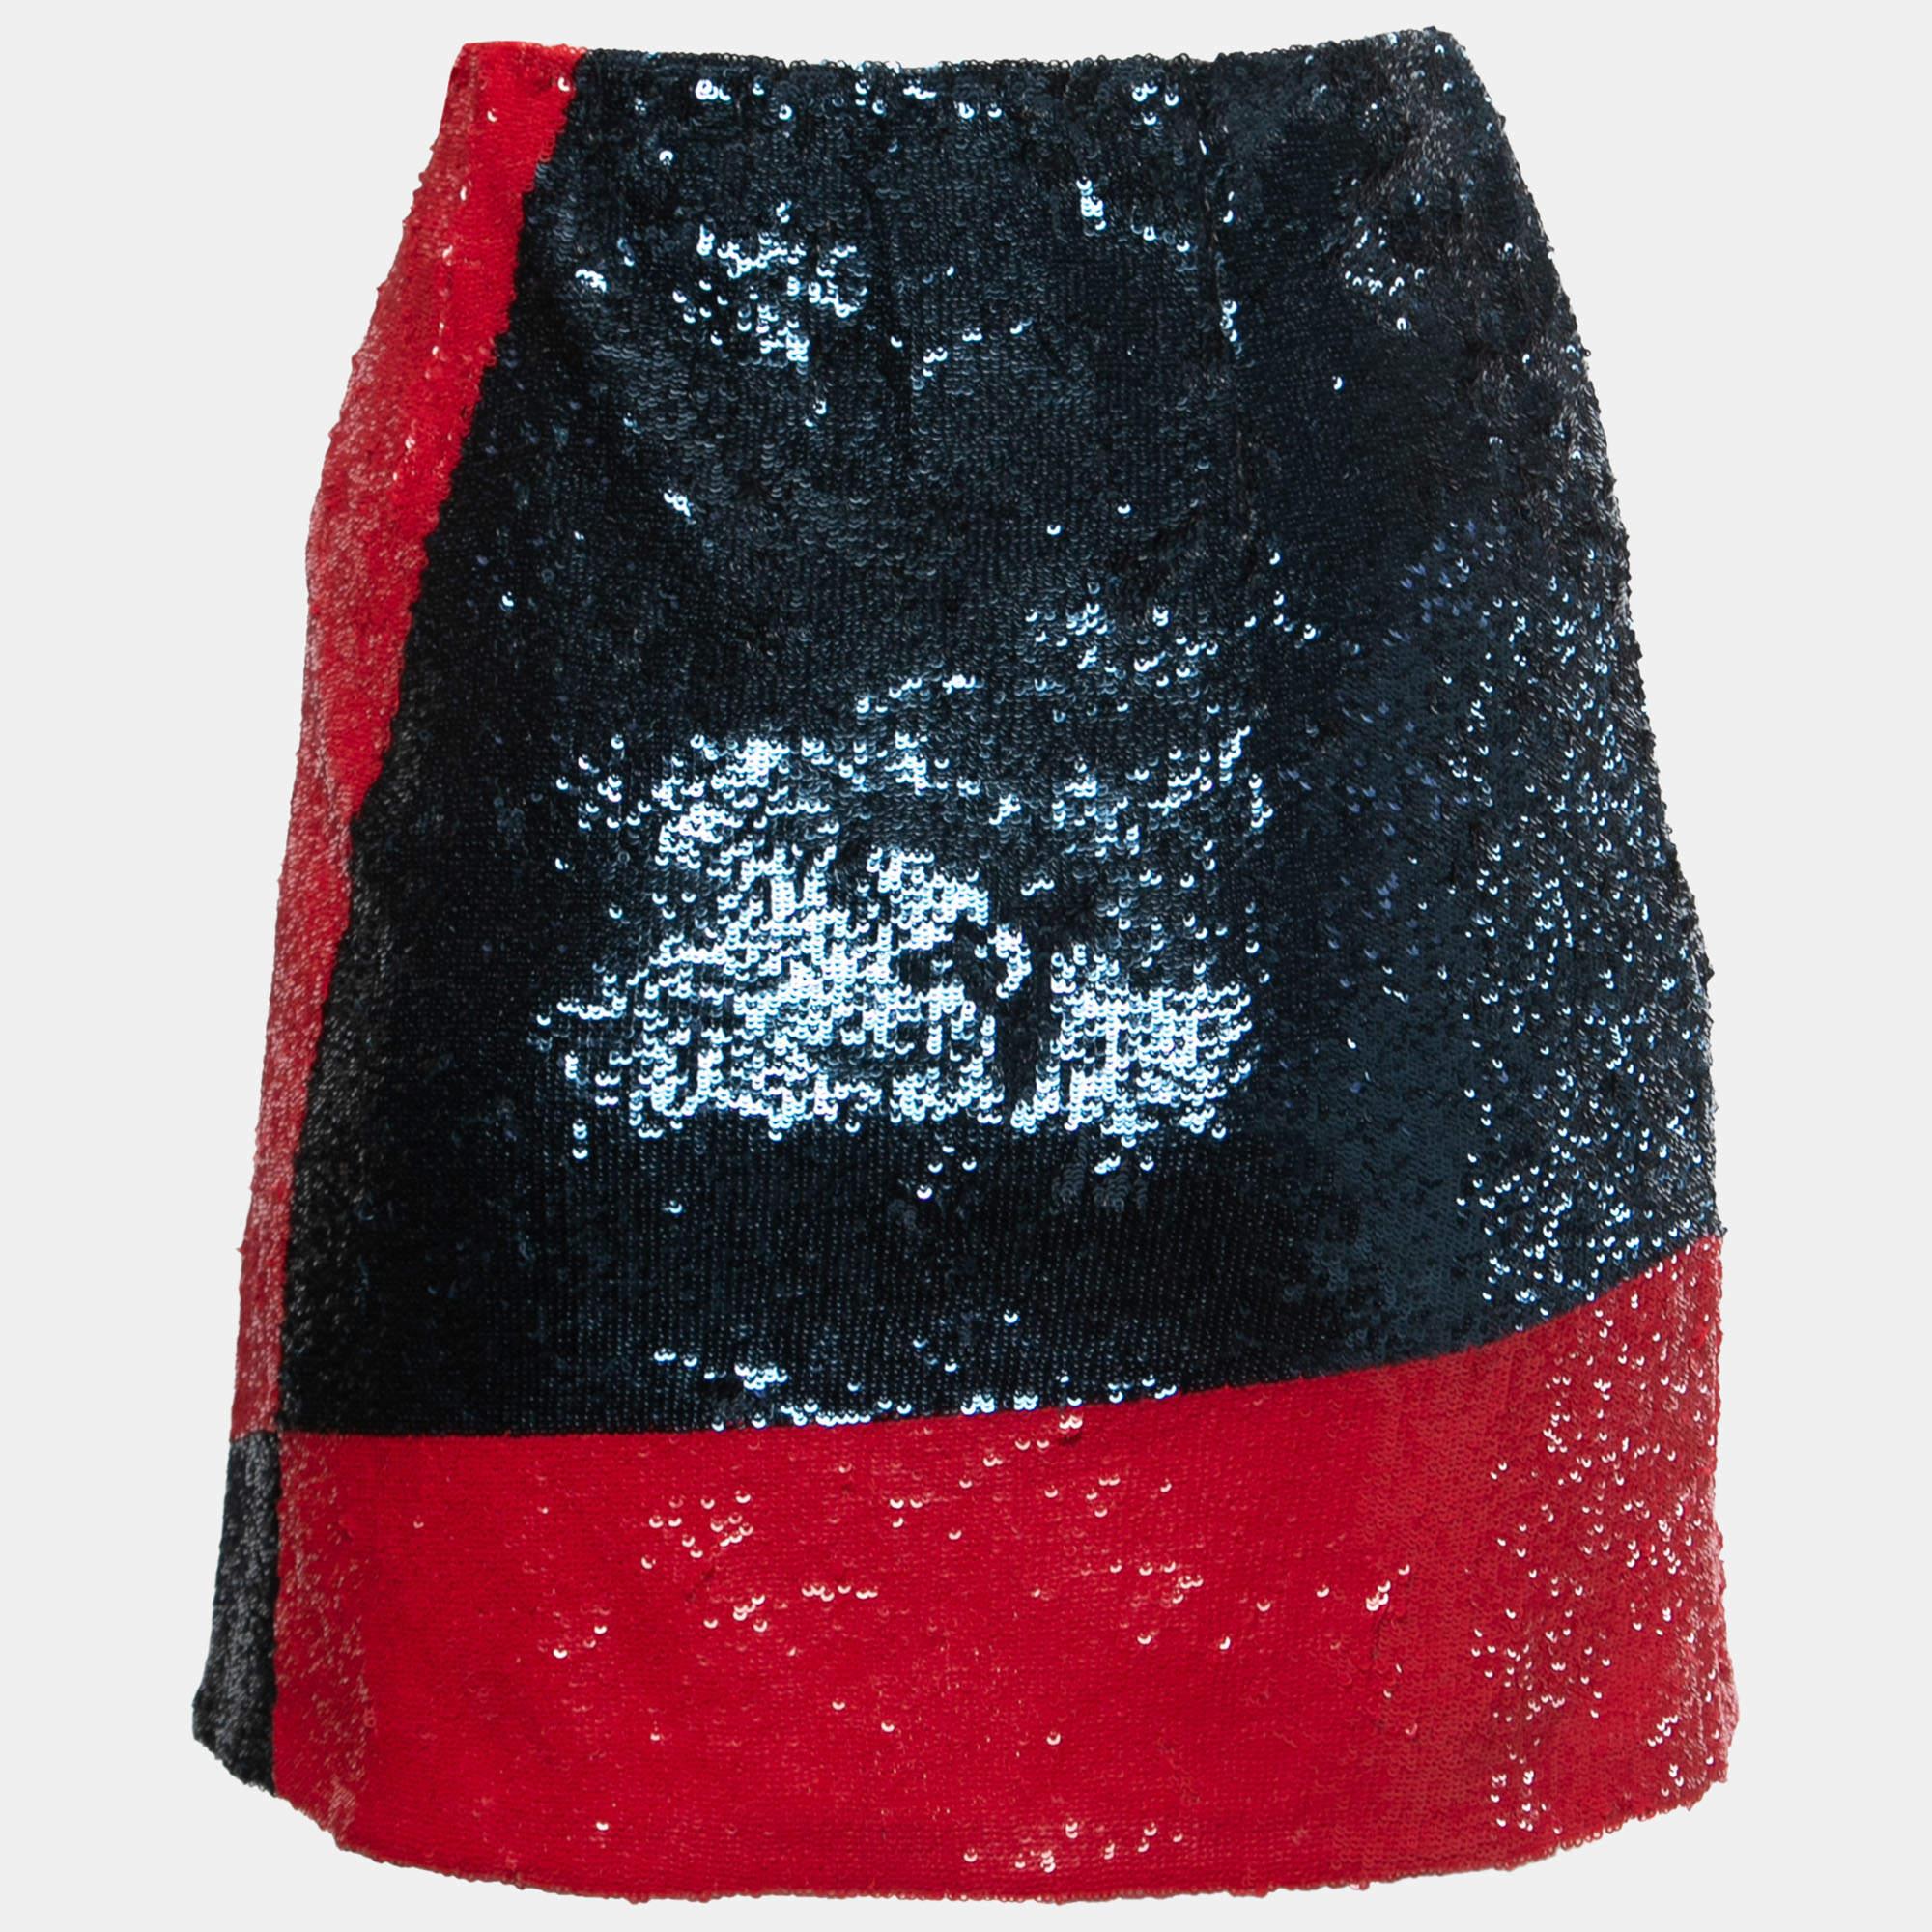 This lovely skirt is beautifully stitched from fine fabric. The comfy designer skirt has a flattering silhouette. Pair it with a simple top and strappy heels for a chic look.

Includes: Price Tag